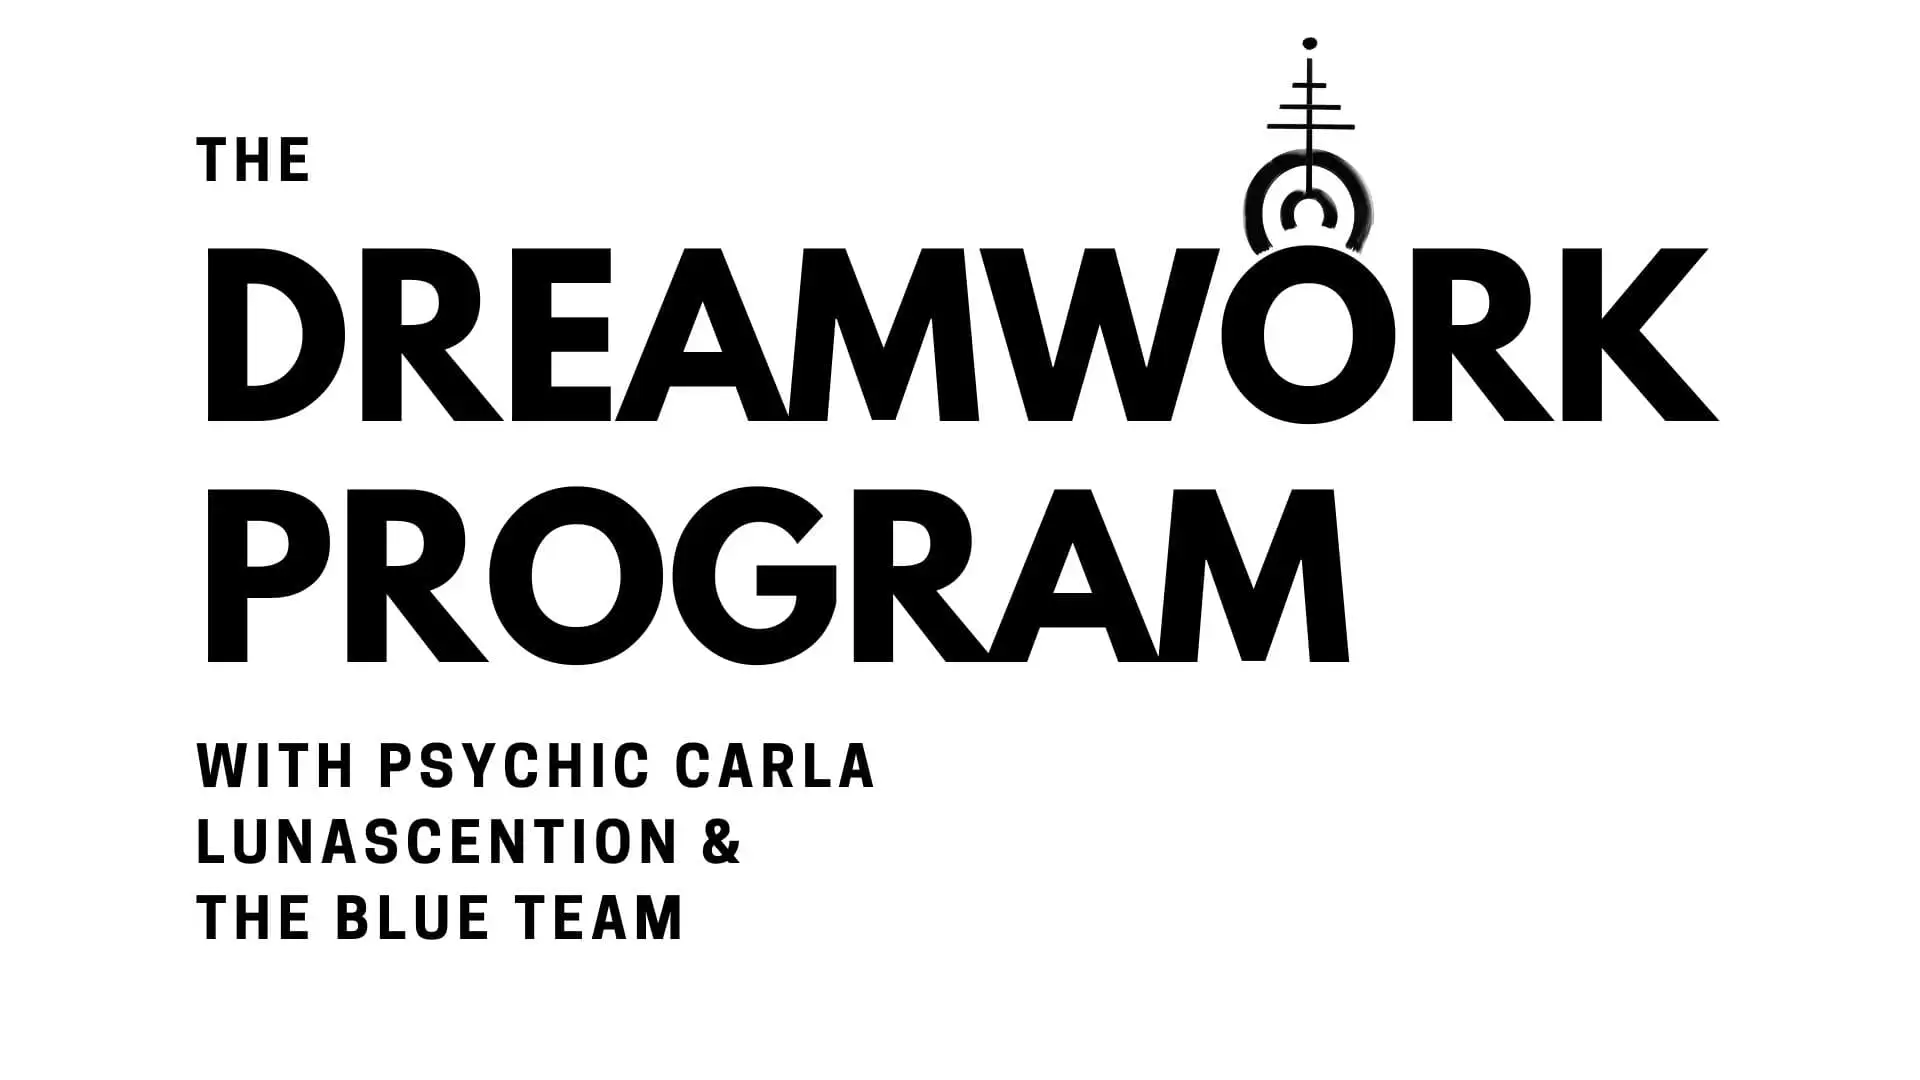 The Dreamwork Program with Psychic Carla LunAscention and the Blue Team